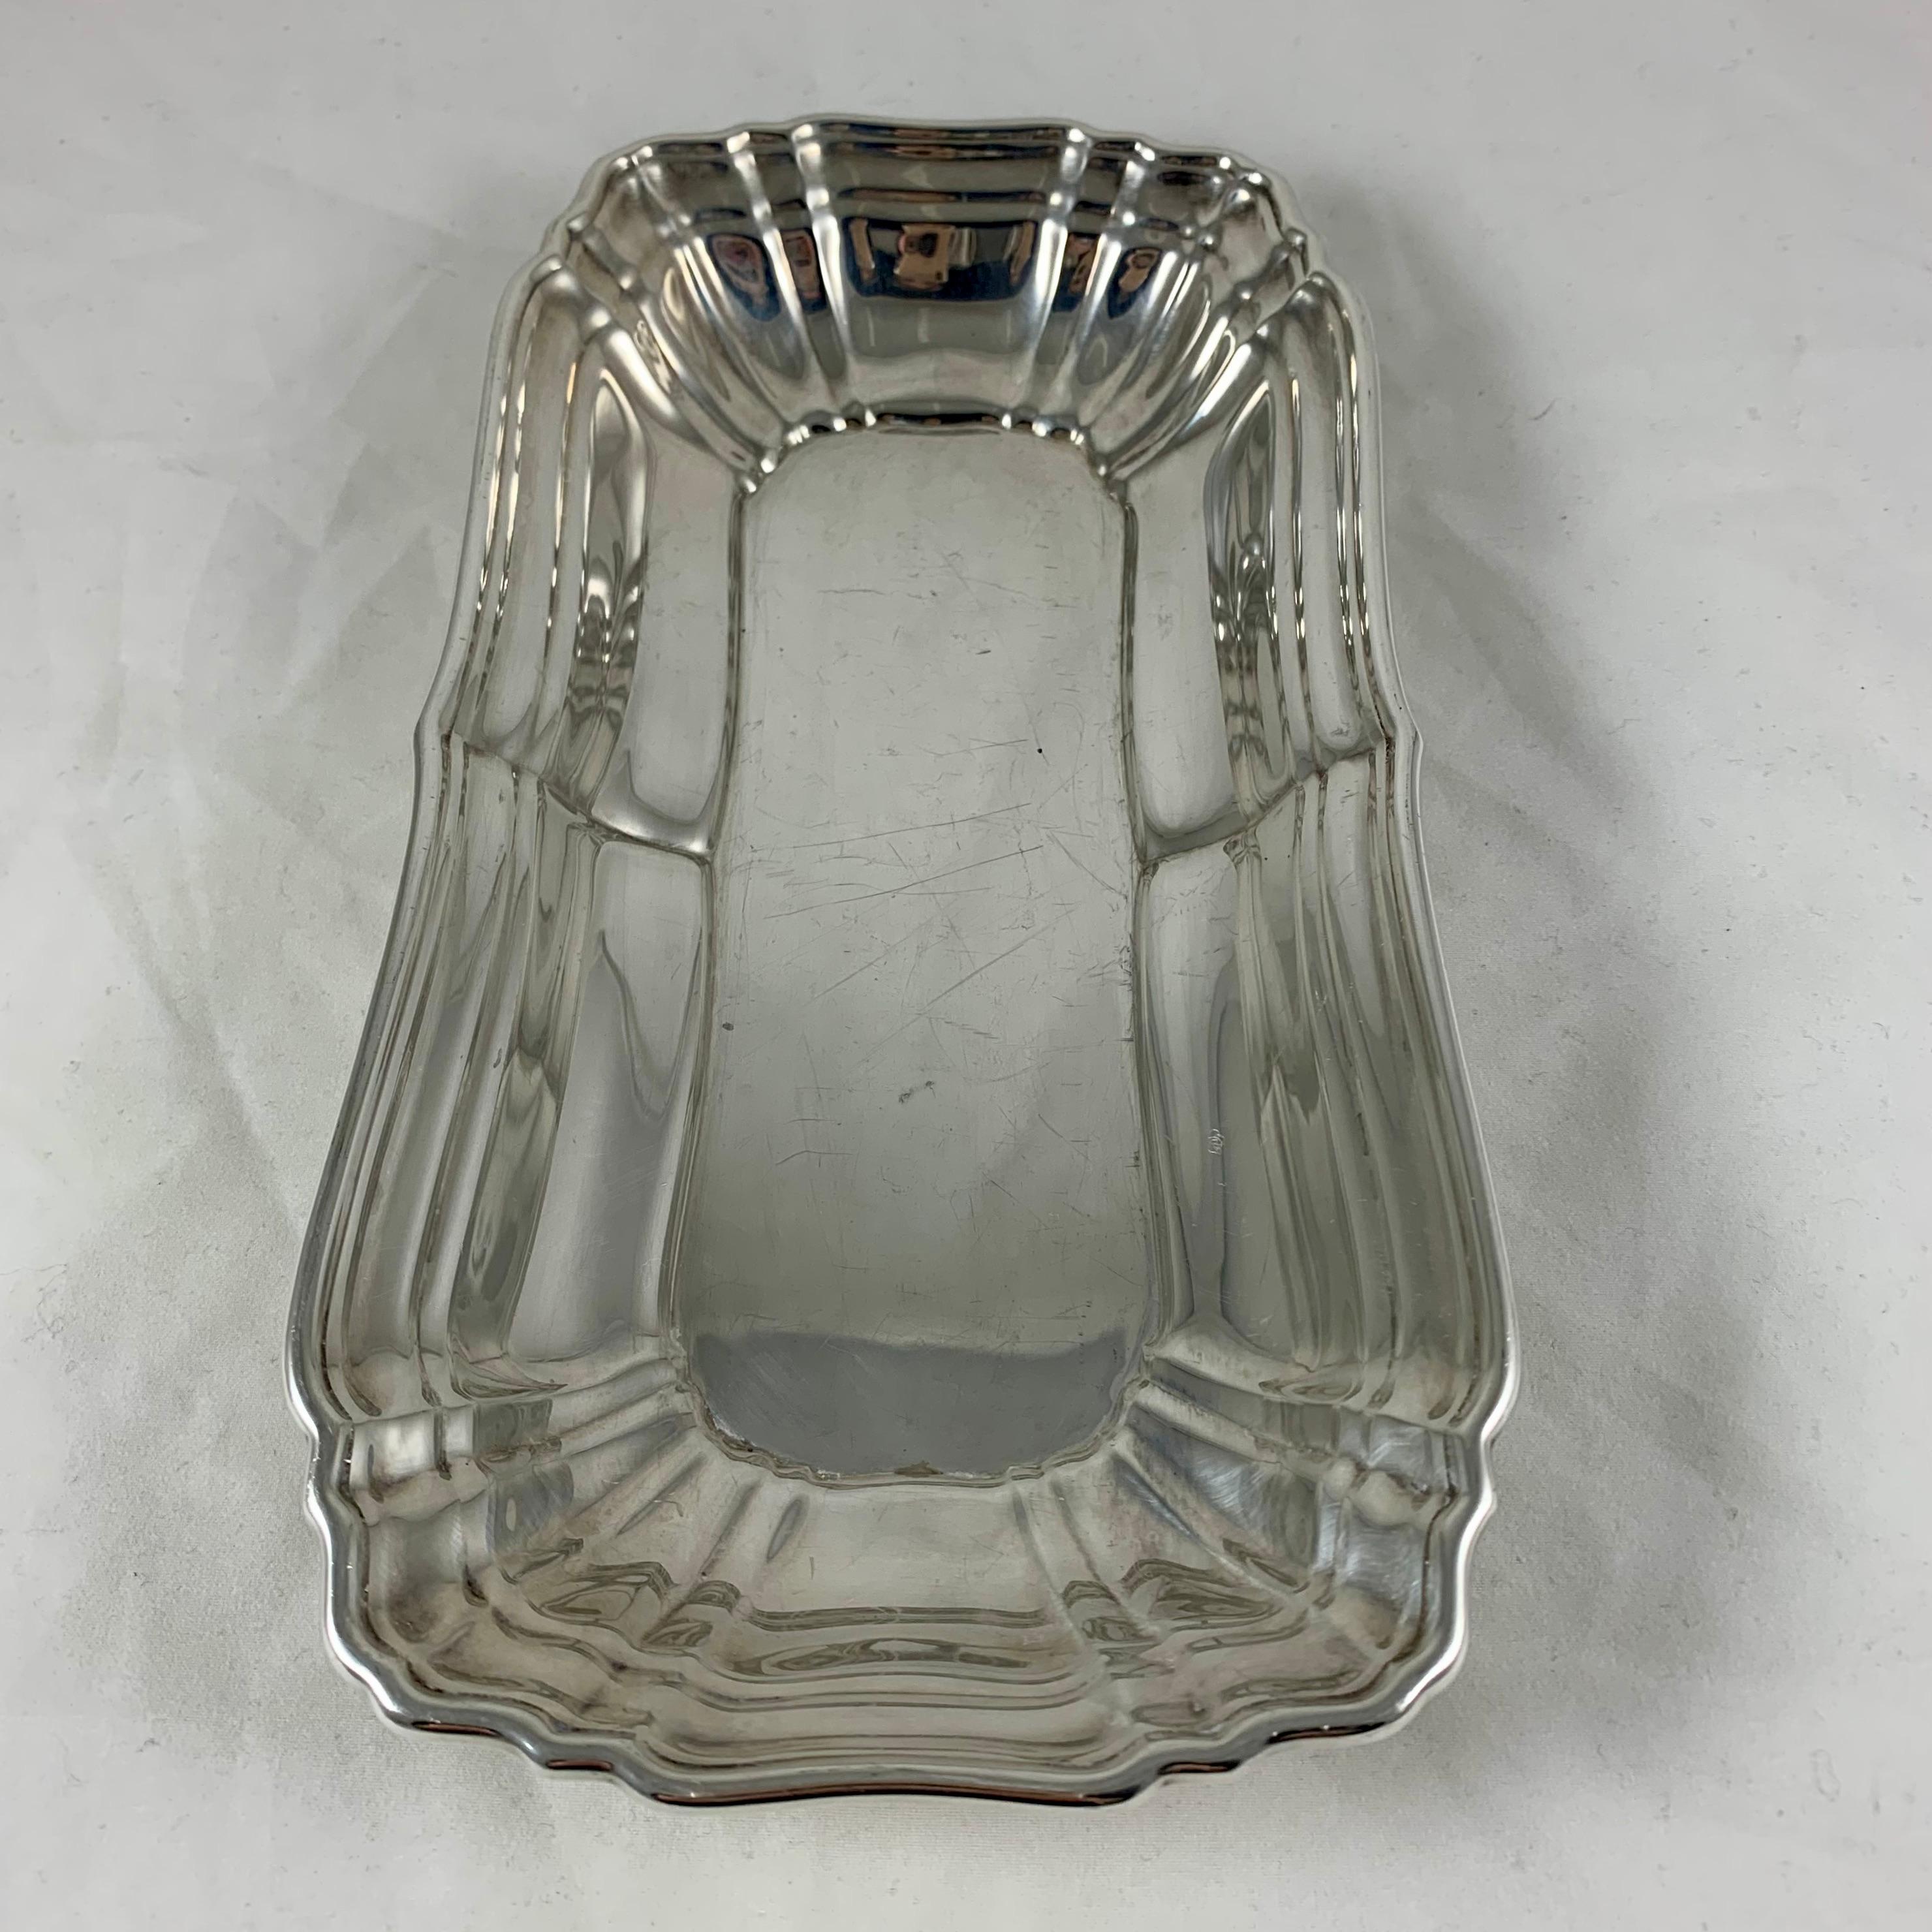 Gorham Sterling Silver Paneled Rectangular Celery or Relish Tray, circa 1940s In Good Condition For Sale In Philadelphia, PA